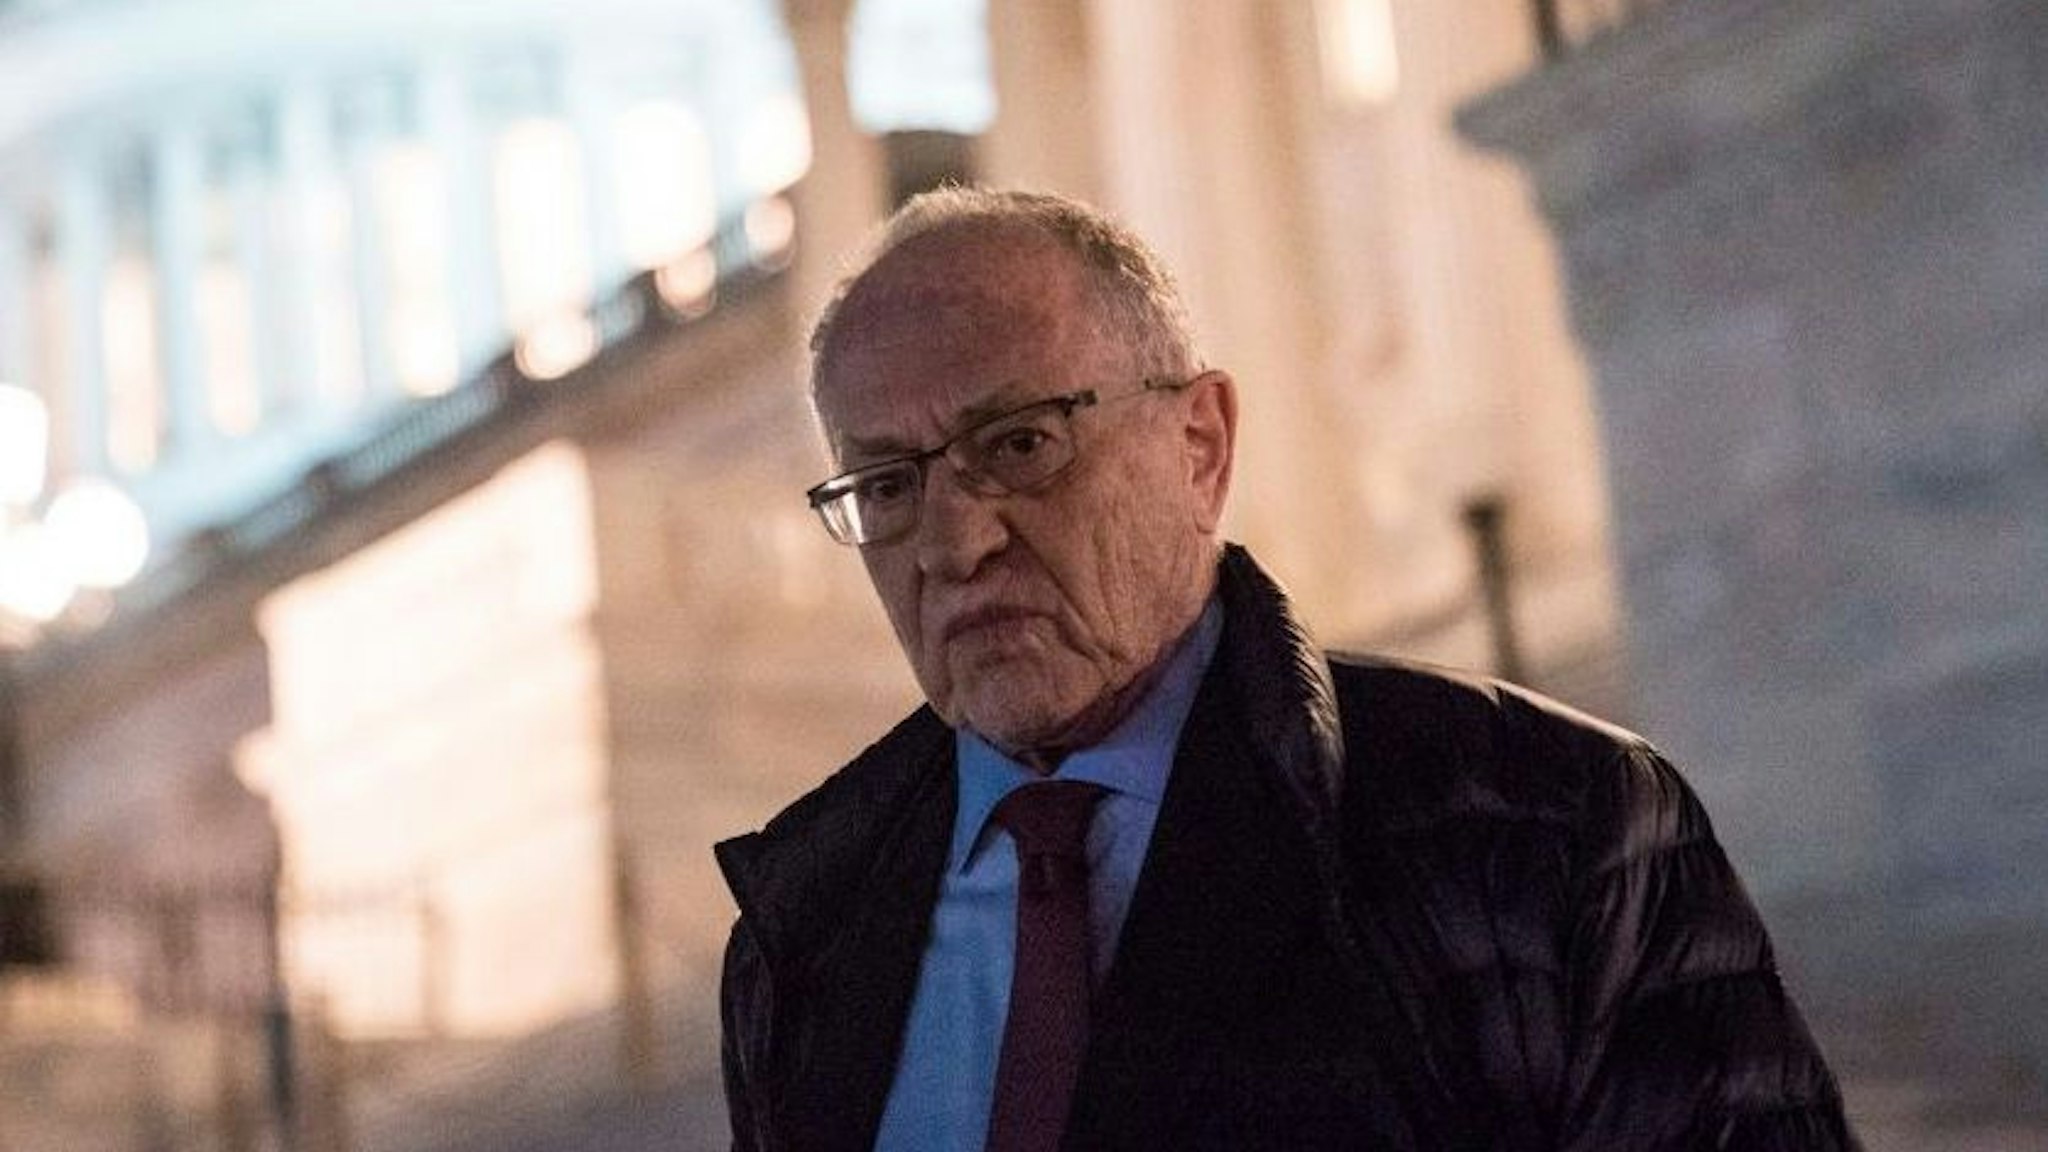 Attorney Alan Dershowitz, a member of President Donald Trump's legal team, leaves the U.S. Capitol following continuation of the impeachment trial in the Senate January 29, 2020 in Washington, DC.